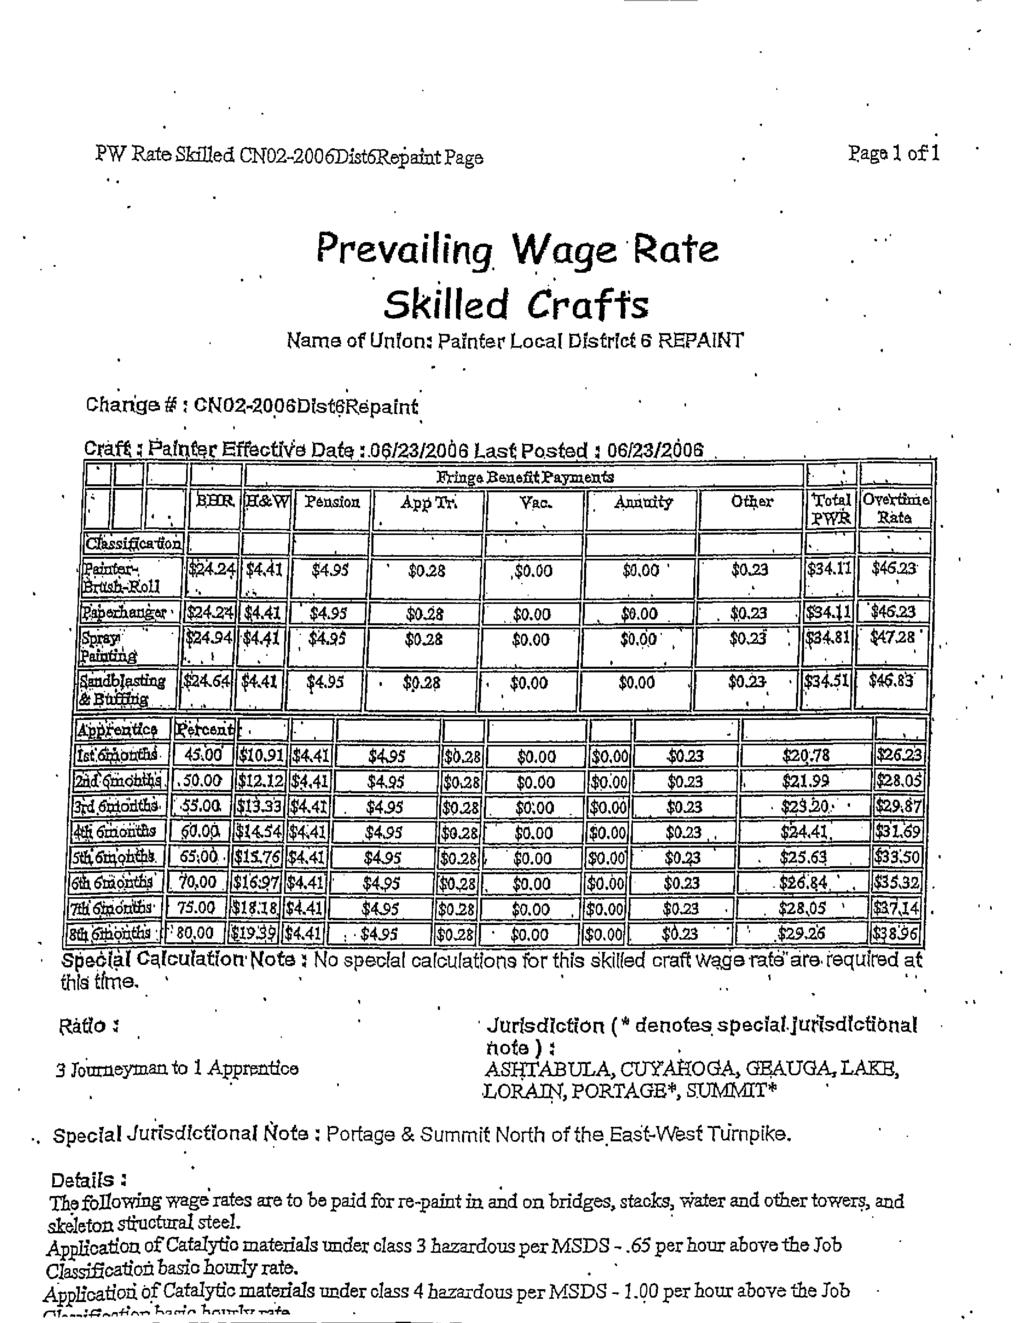 PW Rate Skilled CNO2-2006Dist6R4aint Page P,age 1 of j. Chariga eno2-2006disaepaint: Prevailing. Wage.